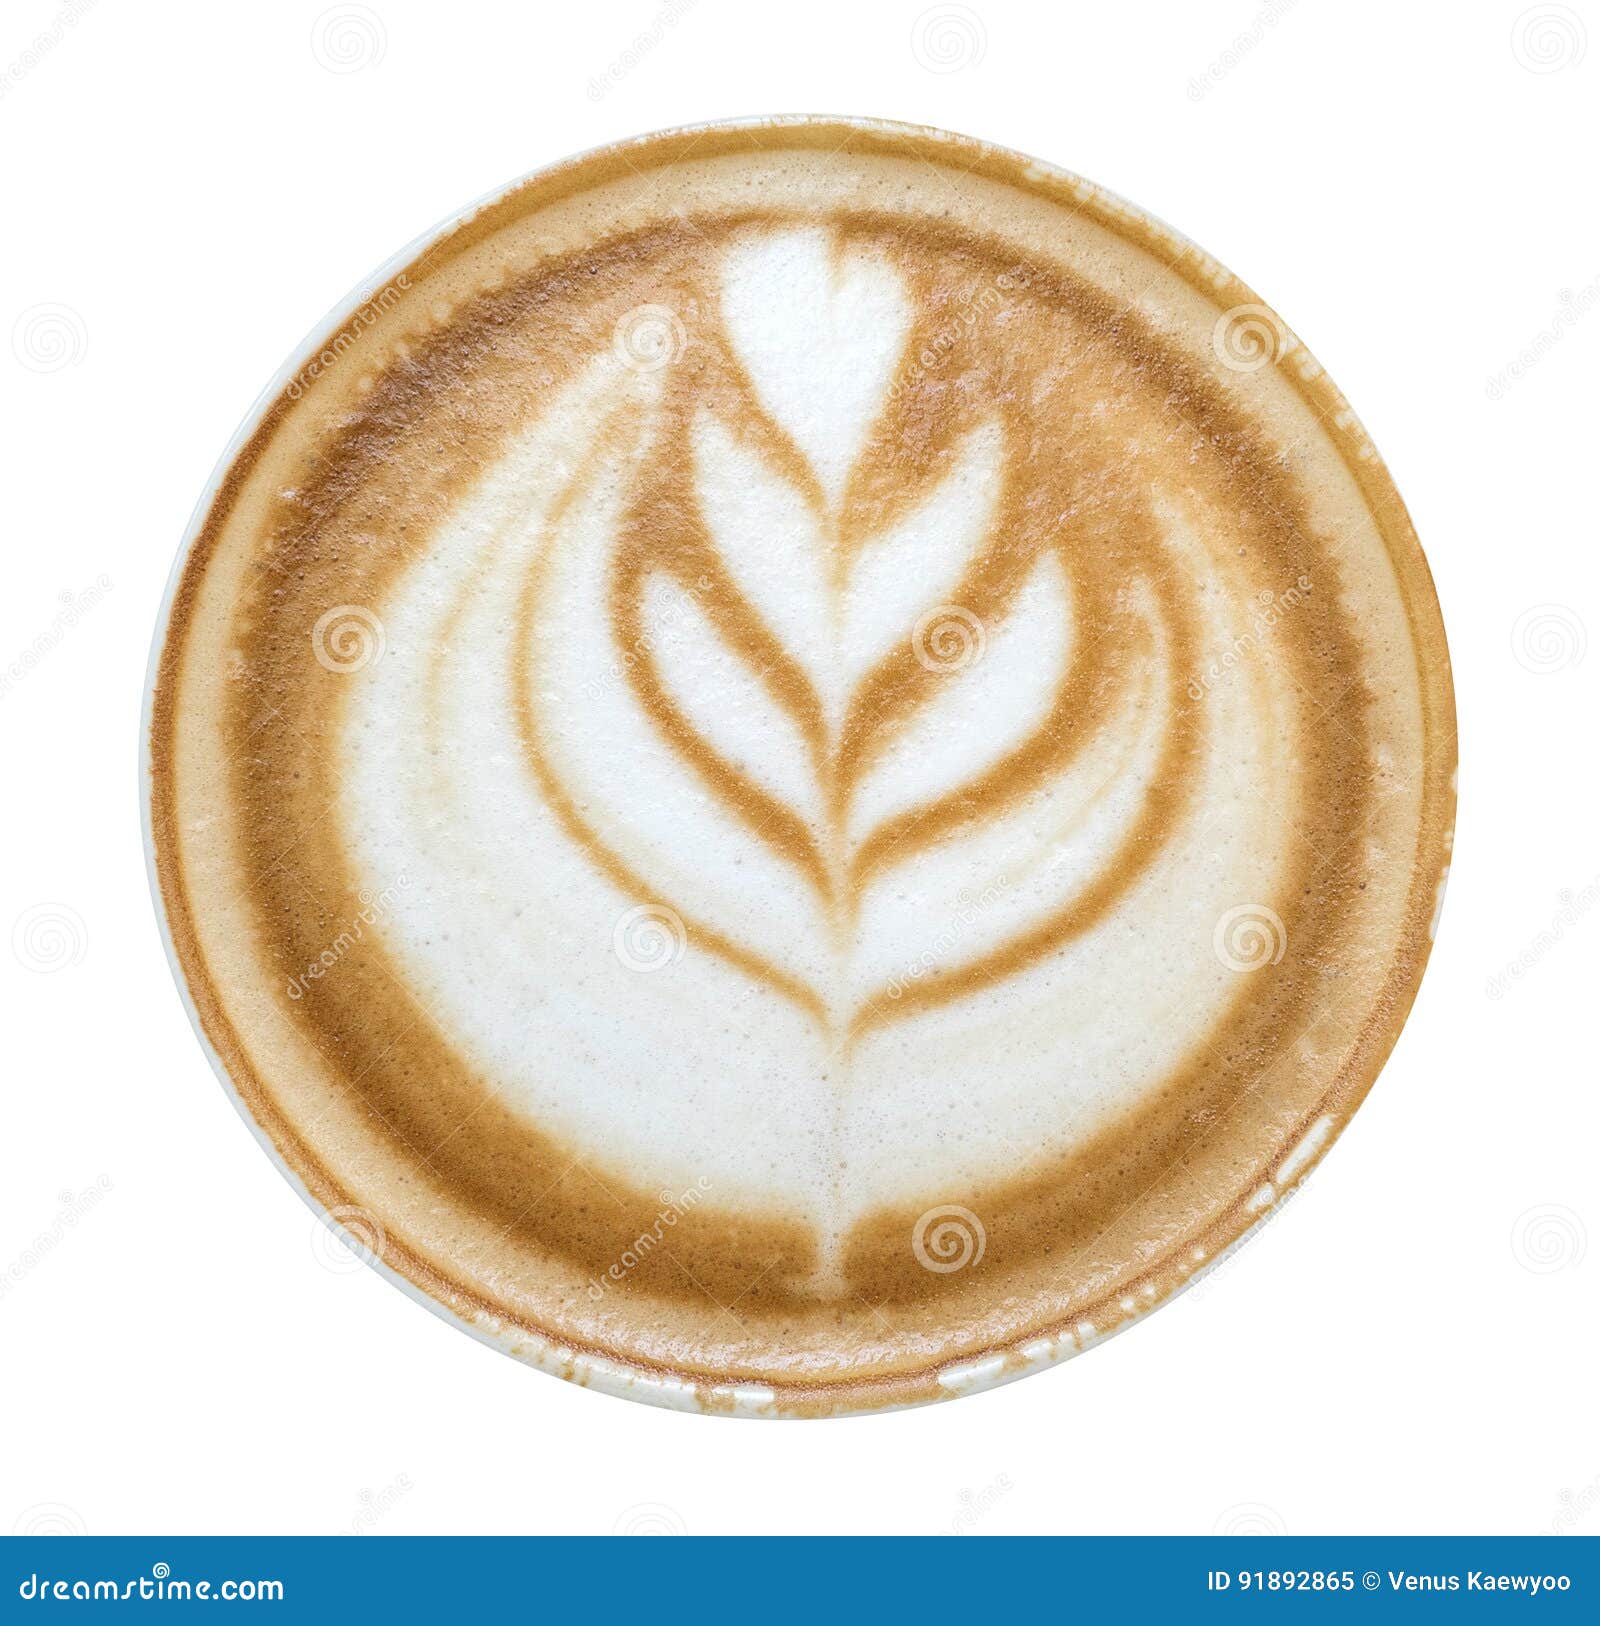 Latte Art Coffee Foam Flower Shape Top View on White Background Stock Image  - Image of capuchino, design: 91892865